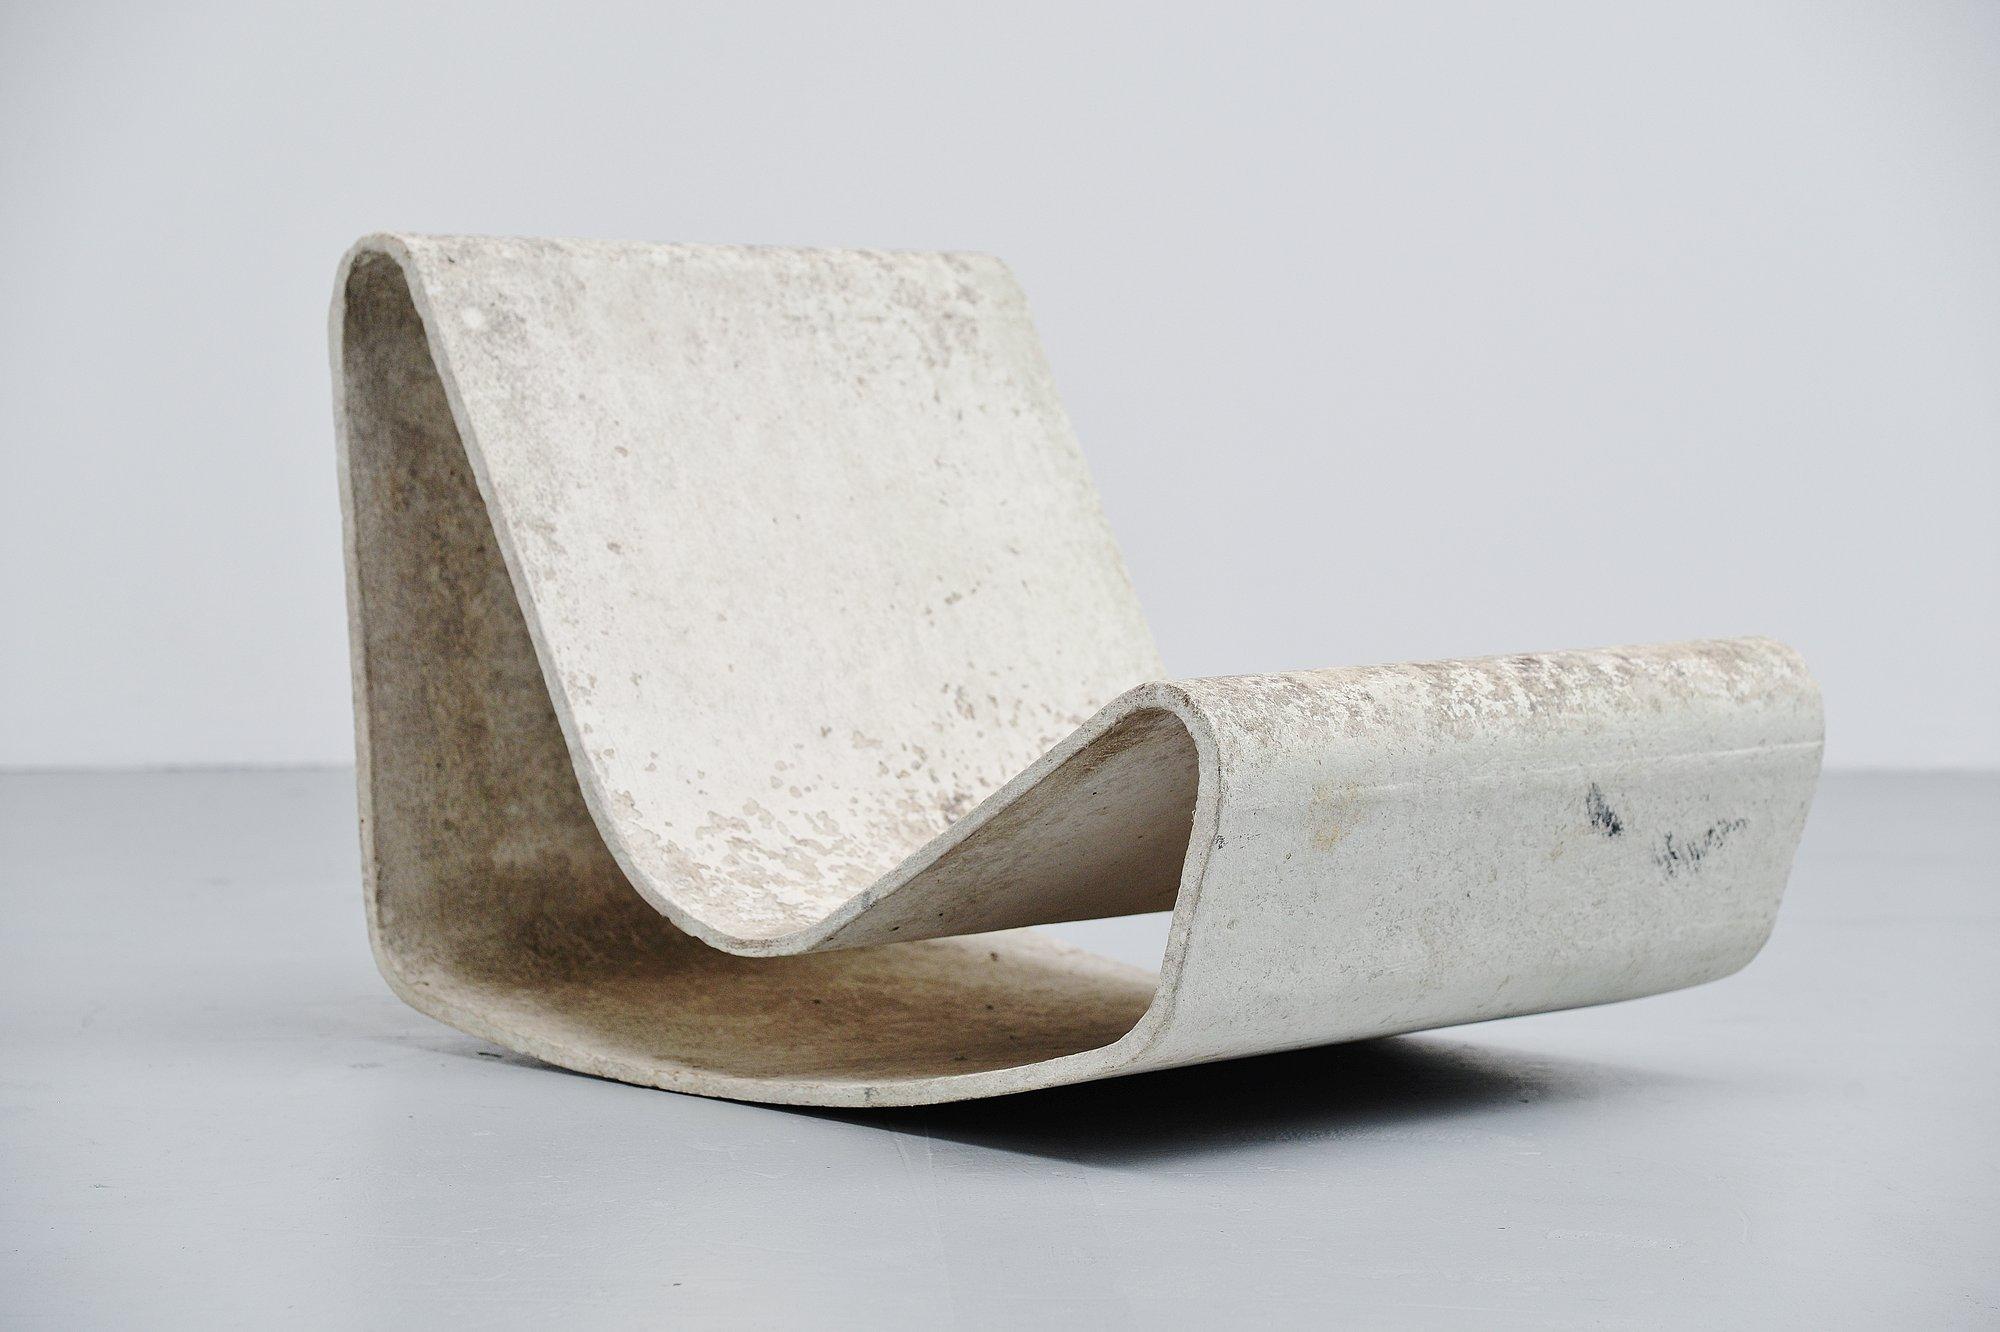 Very nice low lounge chair designed by Willy Guhl for Eternit AG, Switzerland 1954. These iconic garden chairs designed by Willy Guhl are made of cellulose infused fiber cement like concrete, which is nearly indestructible. The chair is in very nice